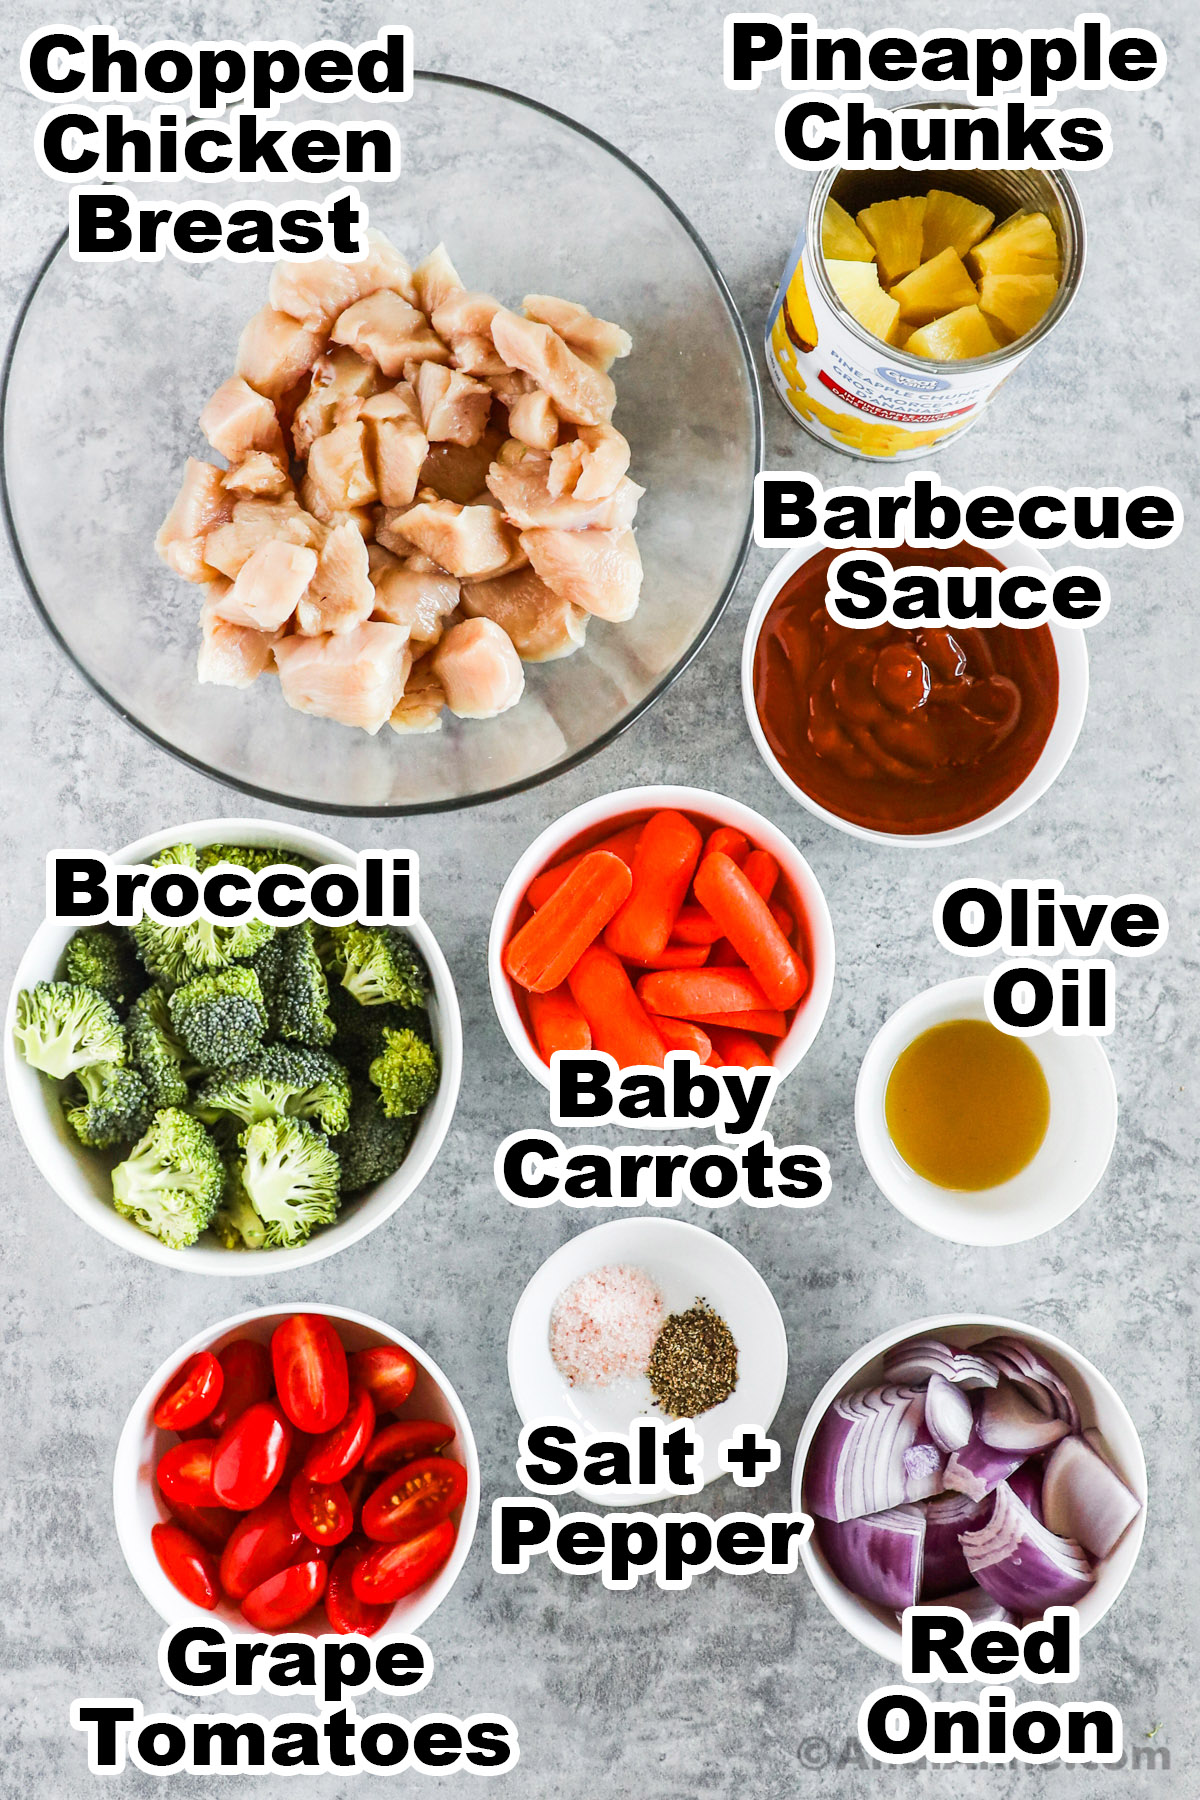 Bowls if ingredients including chopped chicken, barbecue sauce, broccoli, baby carrots, olive oil, tomatoes, red onion, salt and pepper.